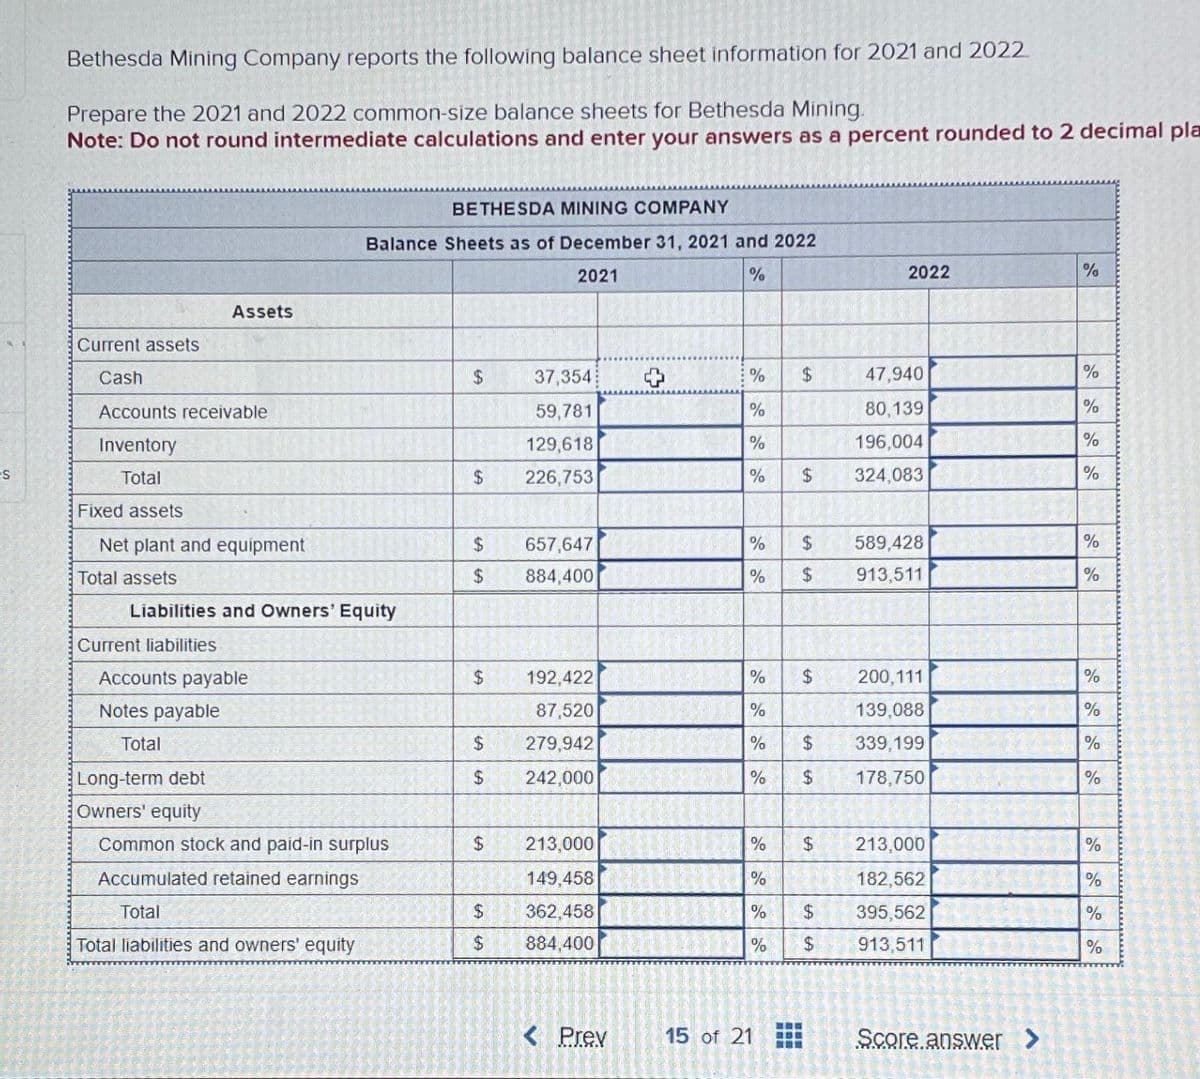 es
Bethesda Mining Company reports the following balance sheet information for 2021 and 2022
Prepare the 2021 and 2022 common-size balance sheets for Bethesda Mining.
Note: Do not round intermediate calculations and enter your answers as a percent rounded to 2 decimal pla
Current assets
Cash
Accounts receivable
Inventory
Total
Fixed assets
Net plant and equipment
Total assets
Assets
Current liabilities
Liabilities and Owners' Equity
Accounts payable
Notes payable
Total
Long-term debt
Owners' equity
BETHESDA MINING COMPANY
Balance Sheets as of December 31, 2021 and 2022
2021
%
Common stock and paid-in surplus
Accumulated retained earnings
Total
Total liabilities and owners' equity
$
$
$
$
$
$
$
$
$
$
37,354
59,781
129,618
226,753
657,647
884,400
192,422
87,520
279,942
242,000
213,000
149,458
362,458
884,400
< Prev
%
%
%
%
$
% $
% $
%
47,940
80,139
MI 196,004
$ 324,083
% $
%
% $
$
LA
15 of 21
$
2022
LA LA
213,000
%
182,562
% $ 395,562
%
913,511
$
589,428
913,511
200,111
139,088
339,199
178,750
Score answer >
%
%
%
%
%
%
%
%
%
%
%
%
%
%
%